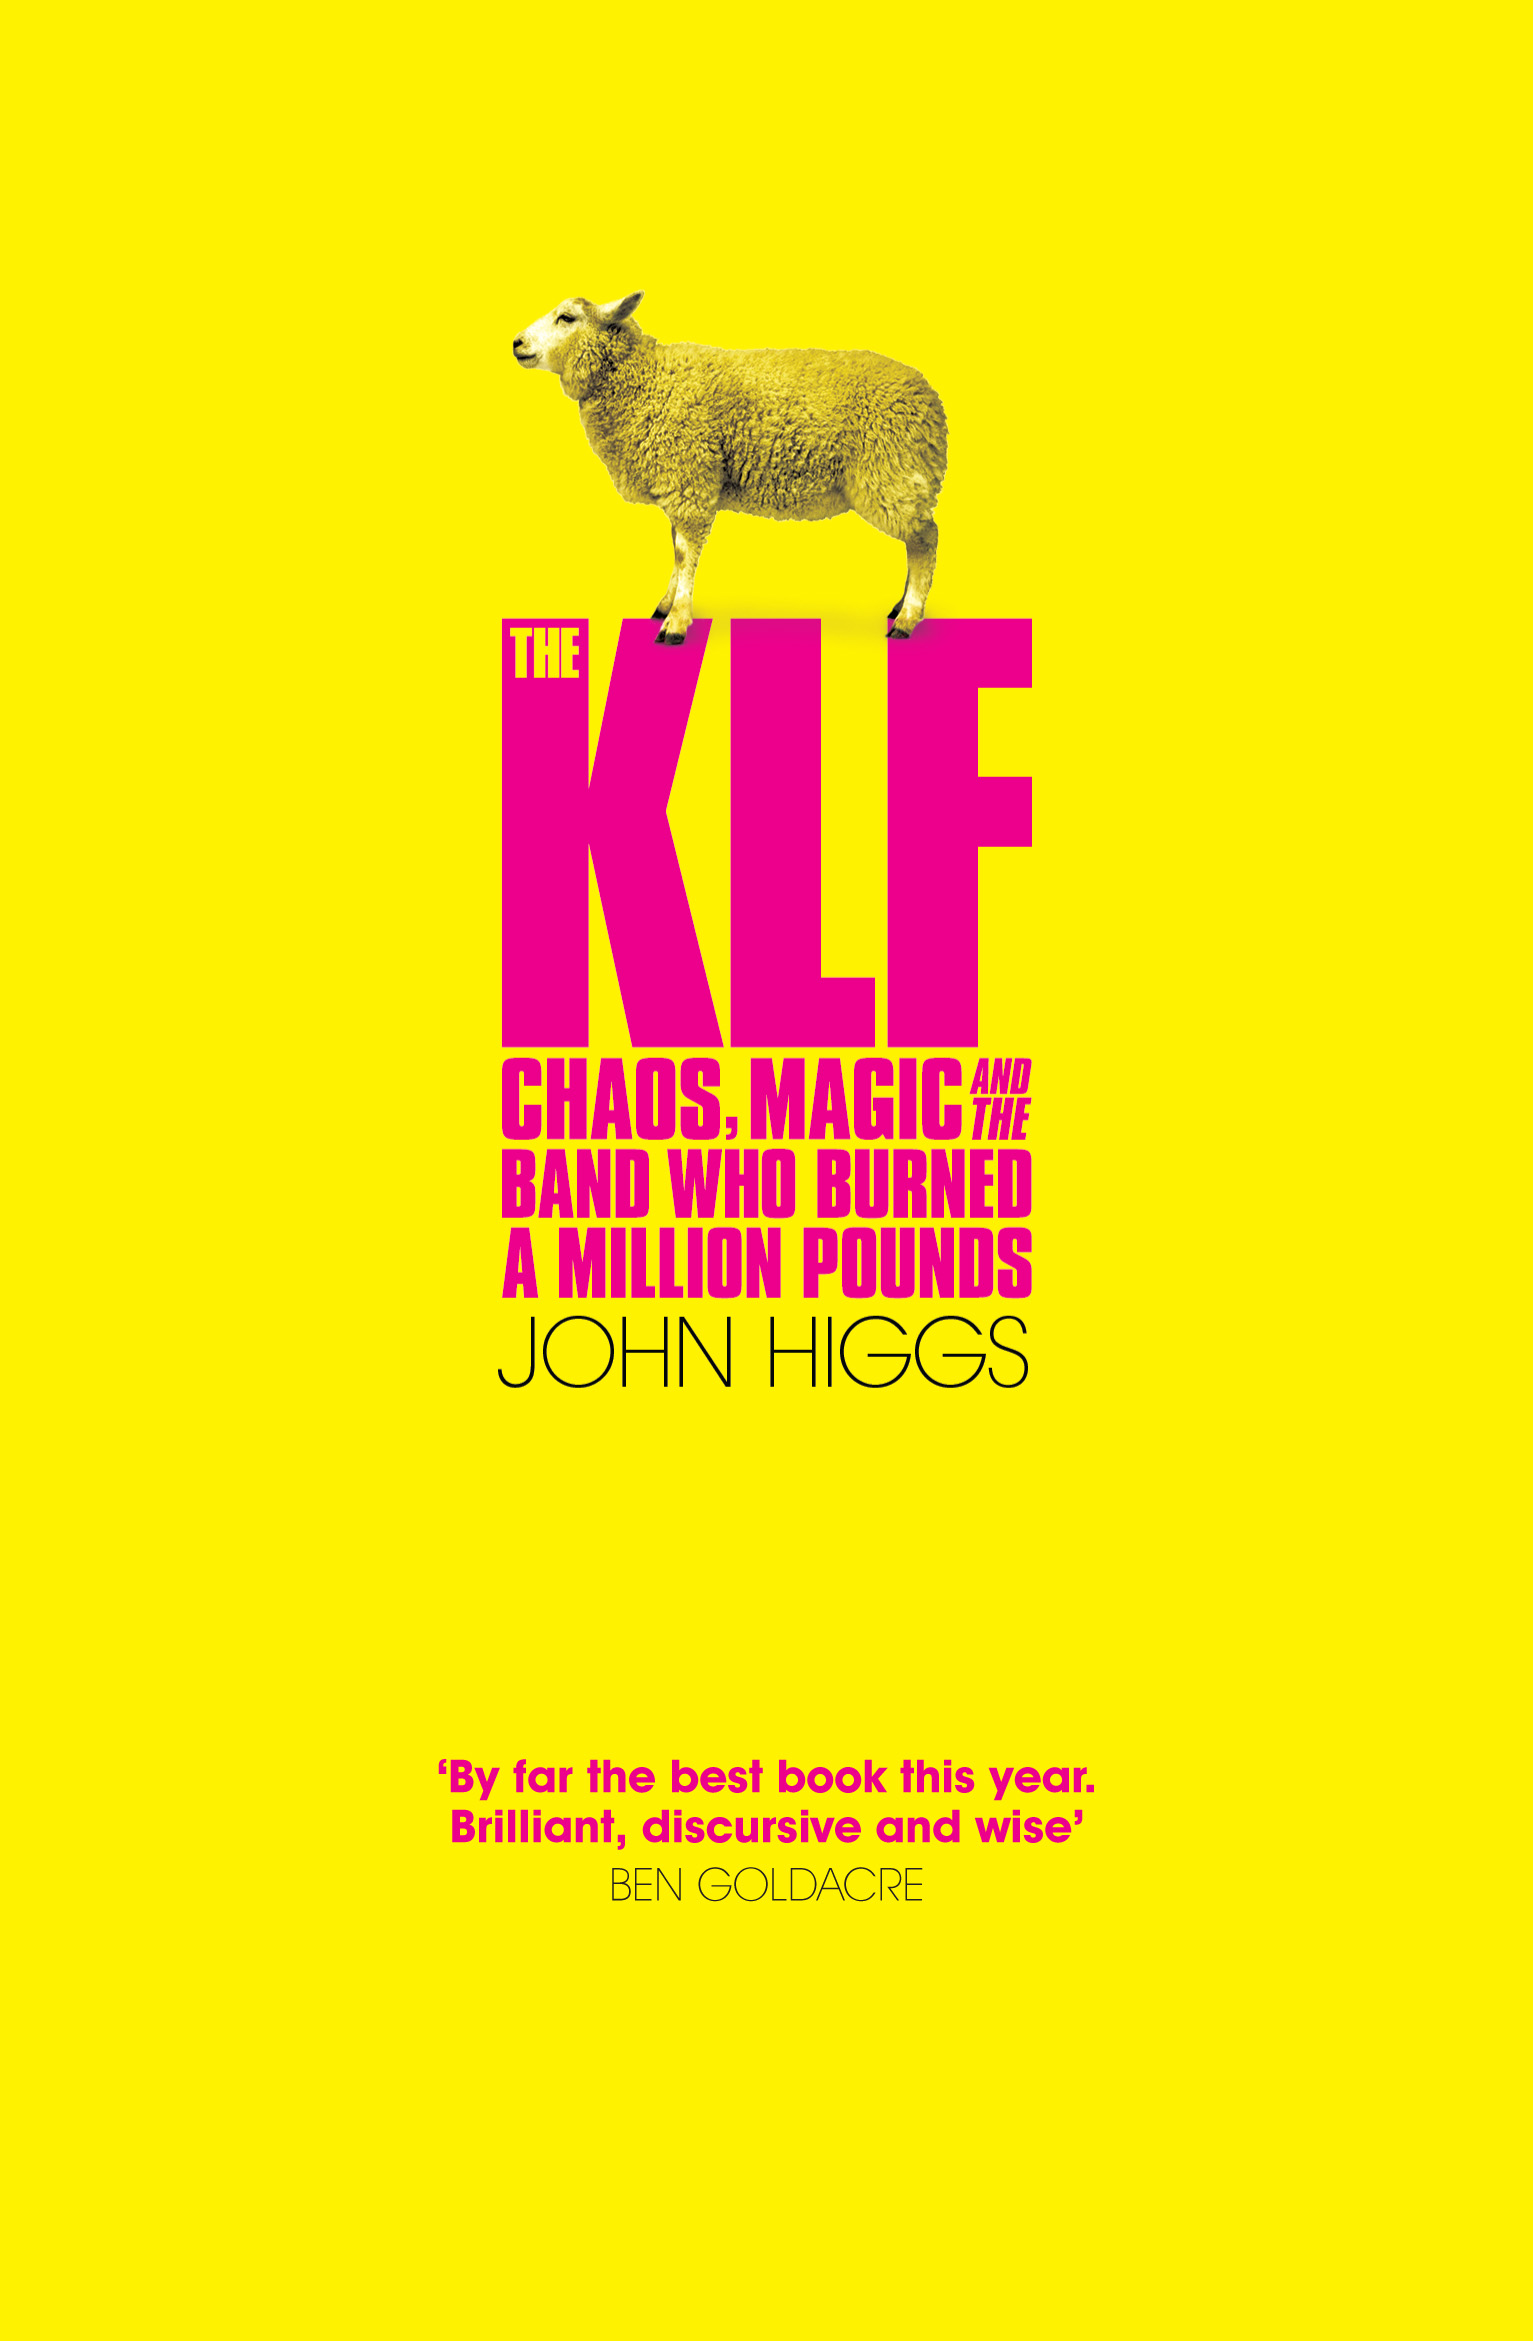 The KLF: Chaos, magic and the band who burned £1M